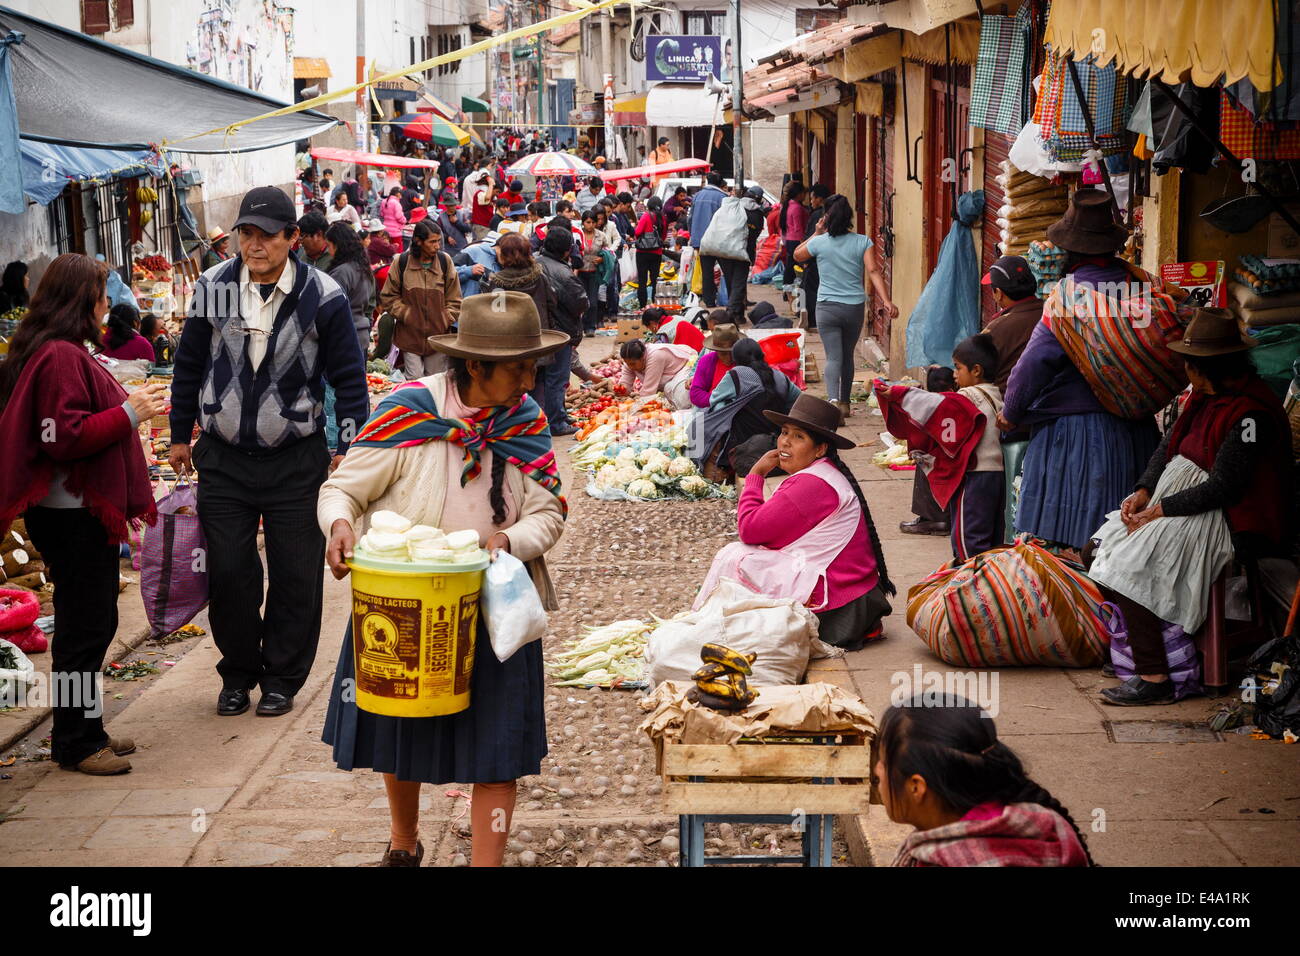 Outdoor vegetable and fruit market, Cuzco, Peru, South America Stock Photo